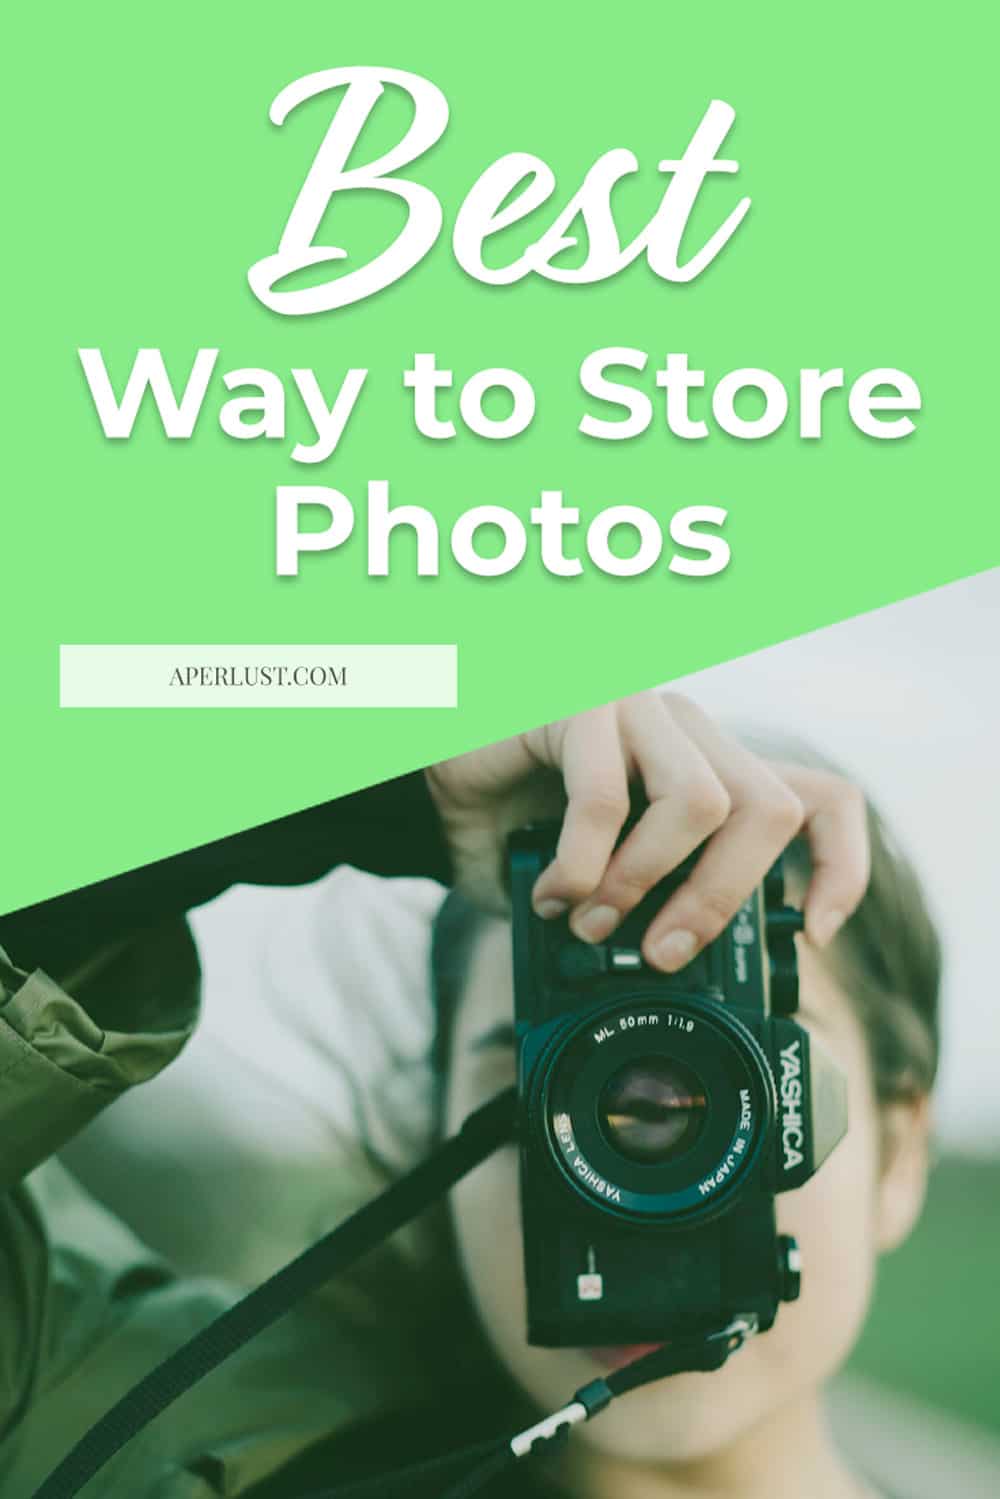 best way to store photos Pinterest image